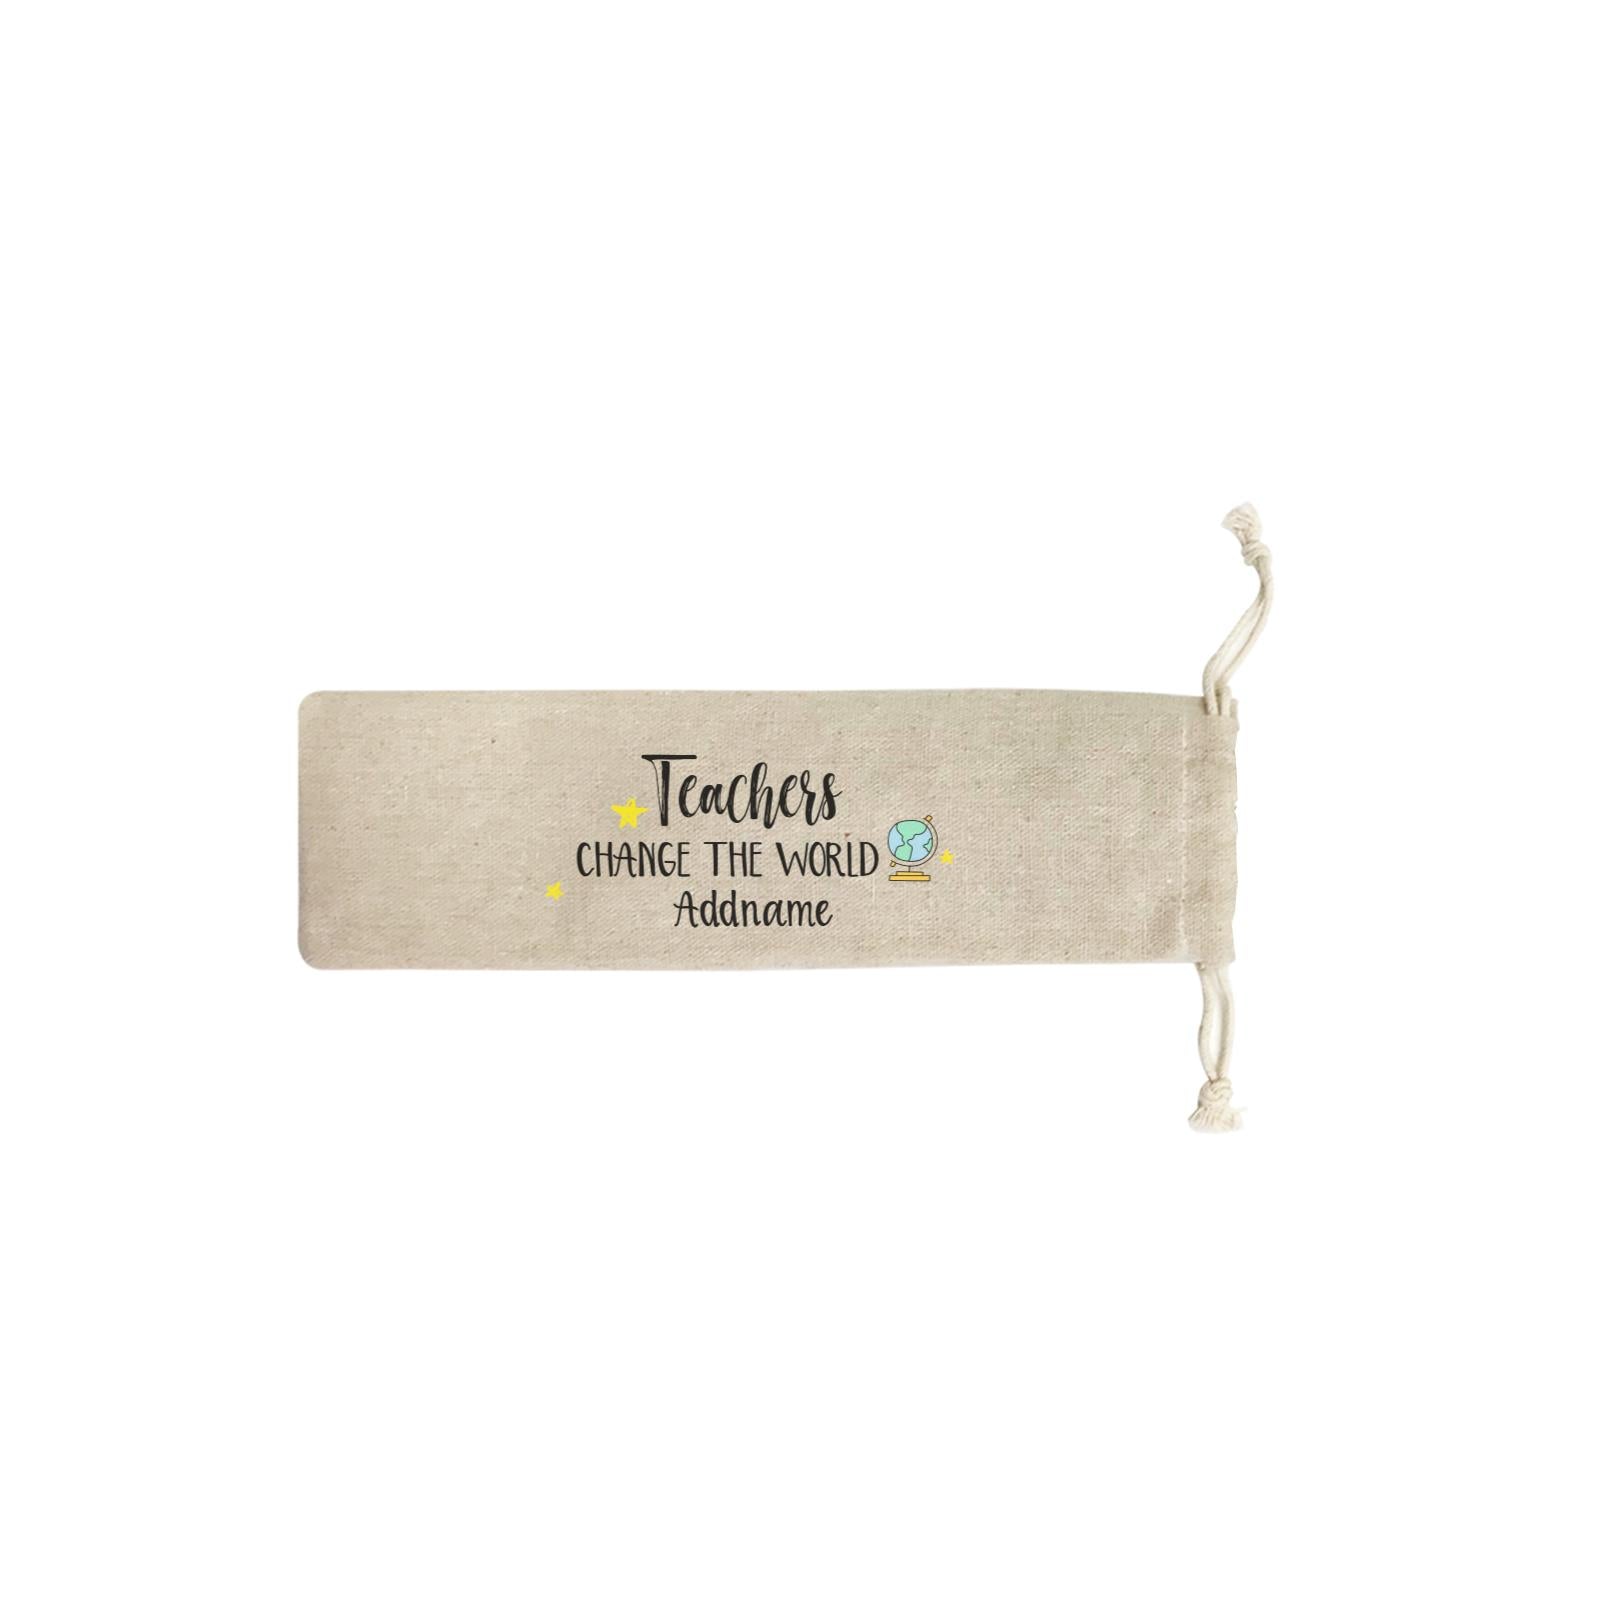 Teacher Quotes Teachers Change The World Addname SB Straw Pouch (No Straws included)